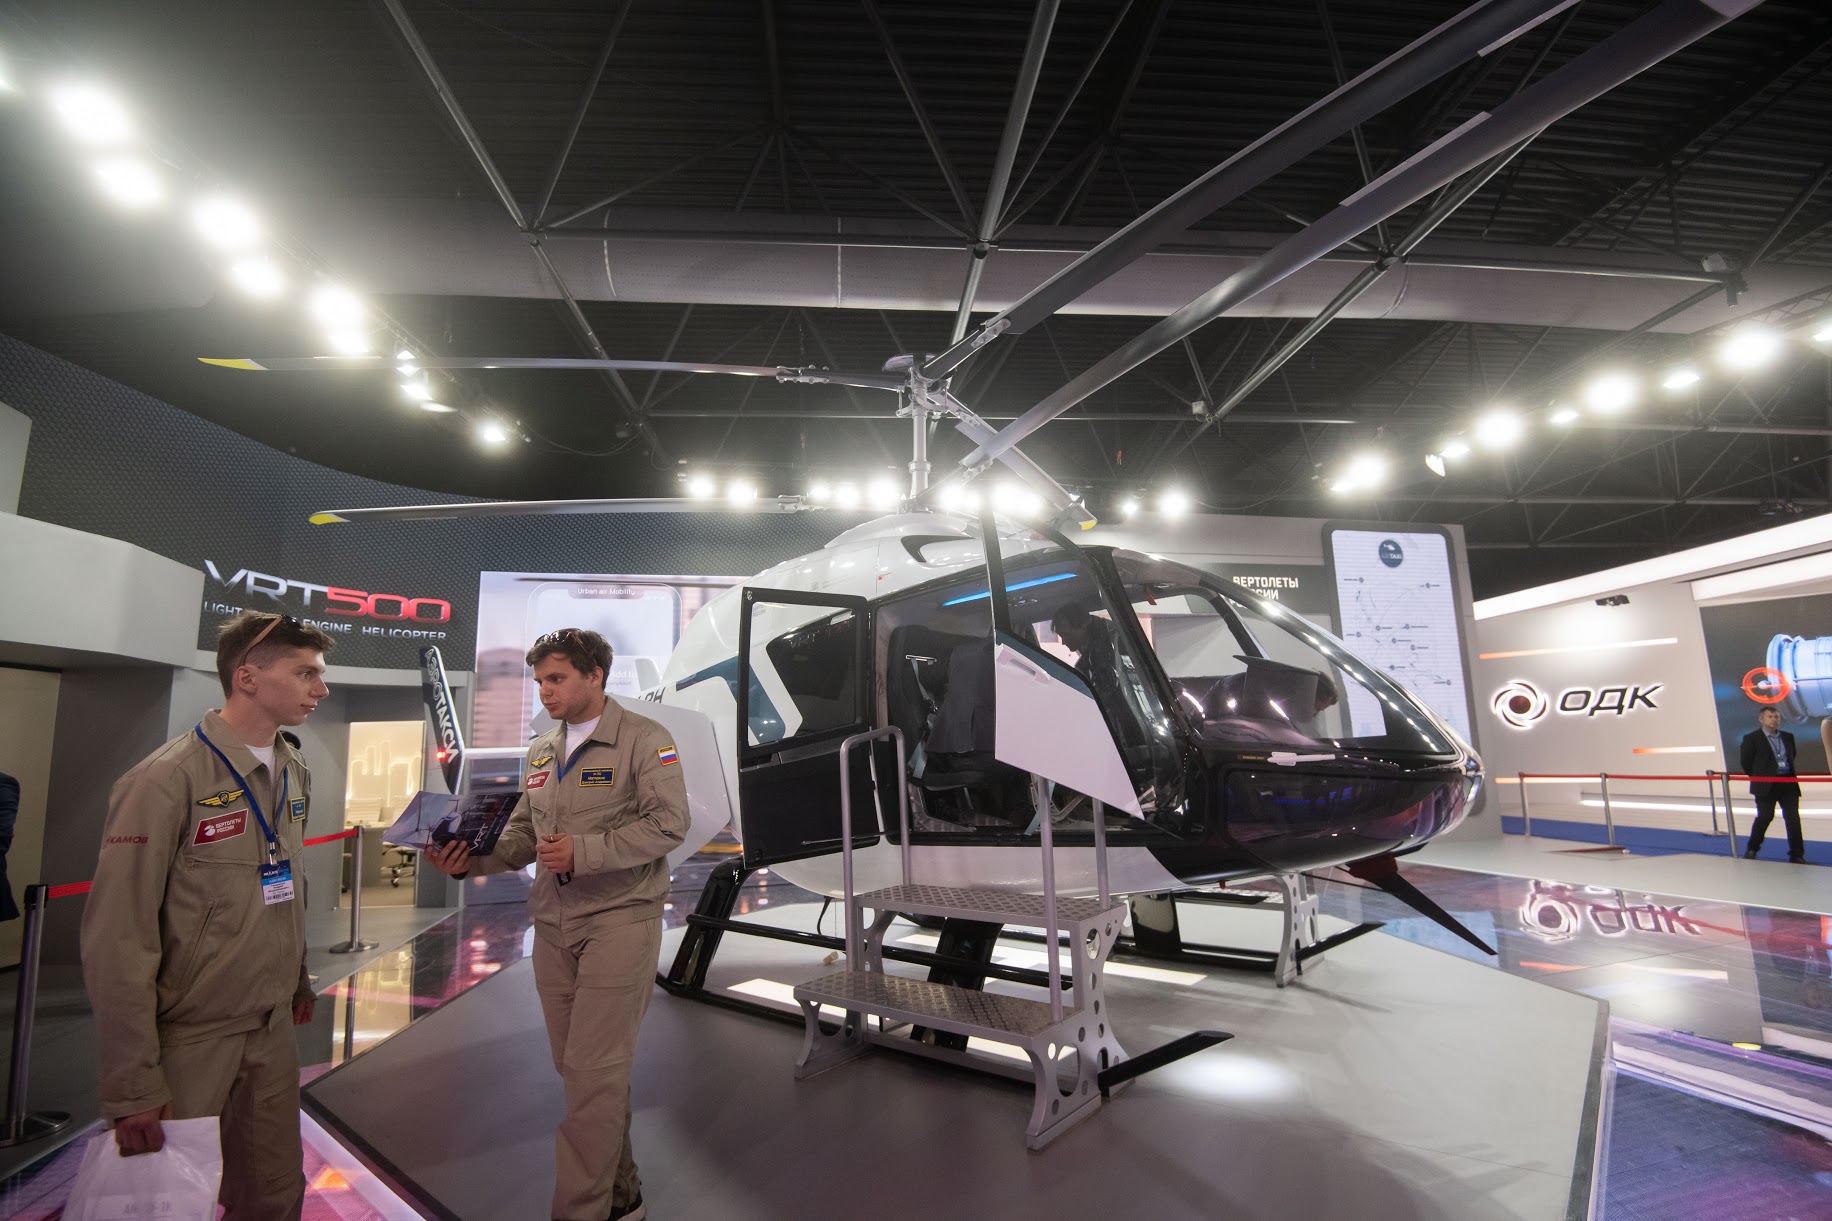 The VRT500 Helicopter Will be Equipped with Pratt & Whitney Engines